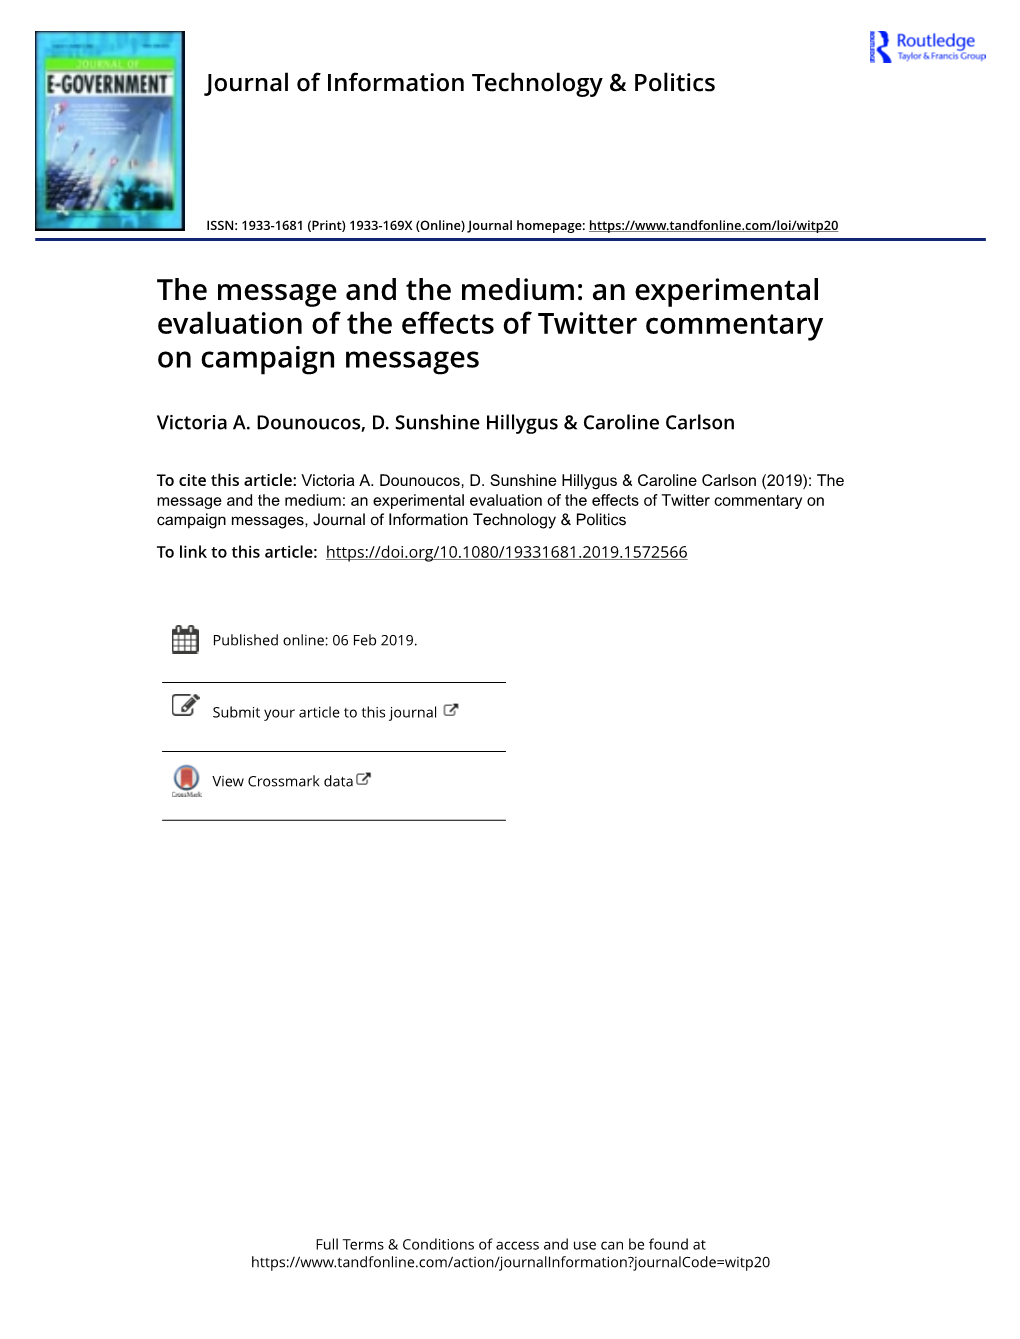 An Experimental Evaluation of the Effects of Twitter Commentary on Campaign Messages